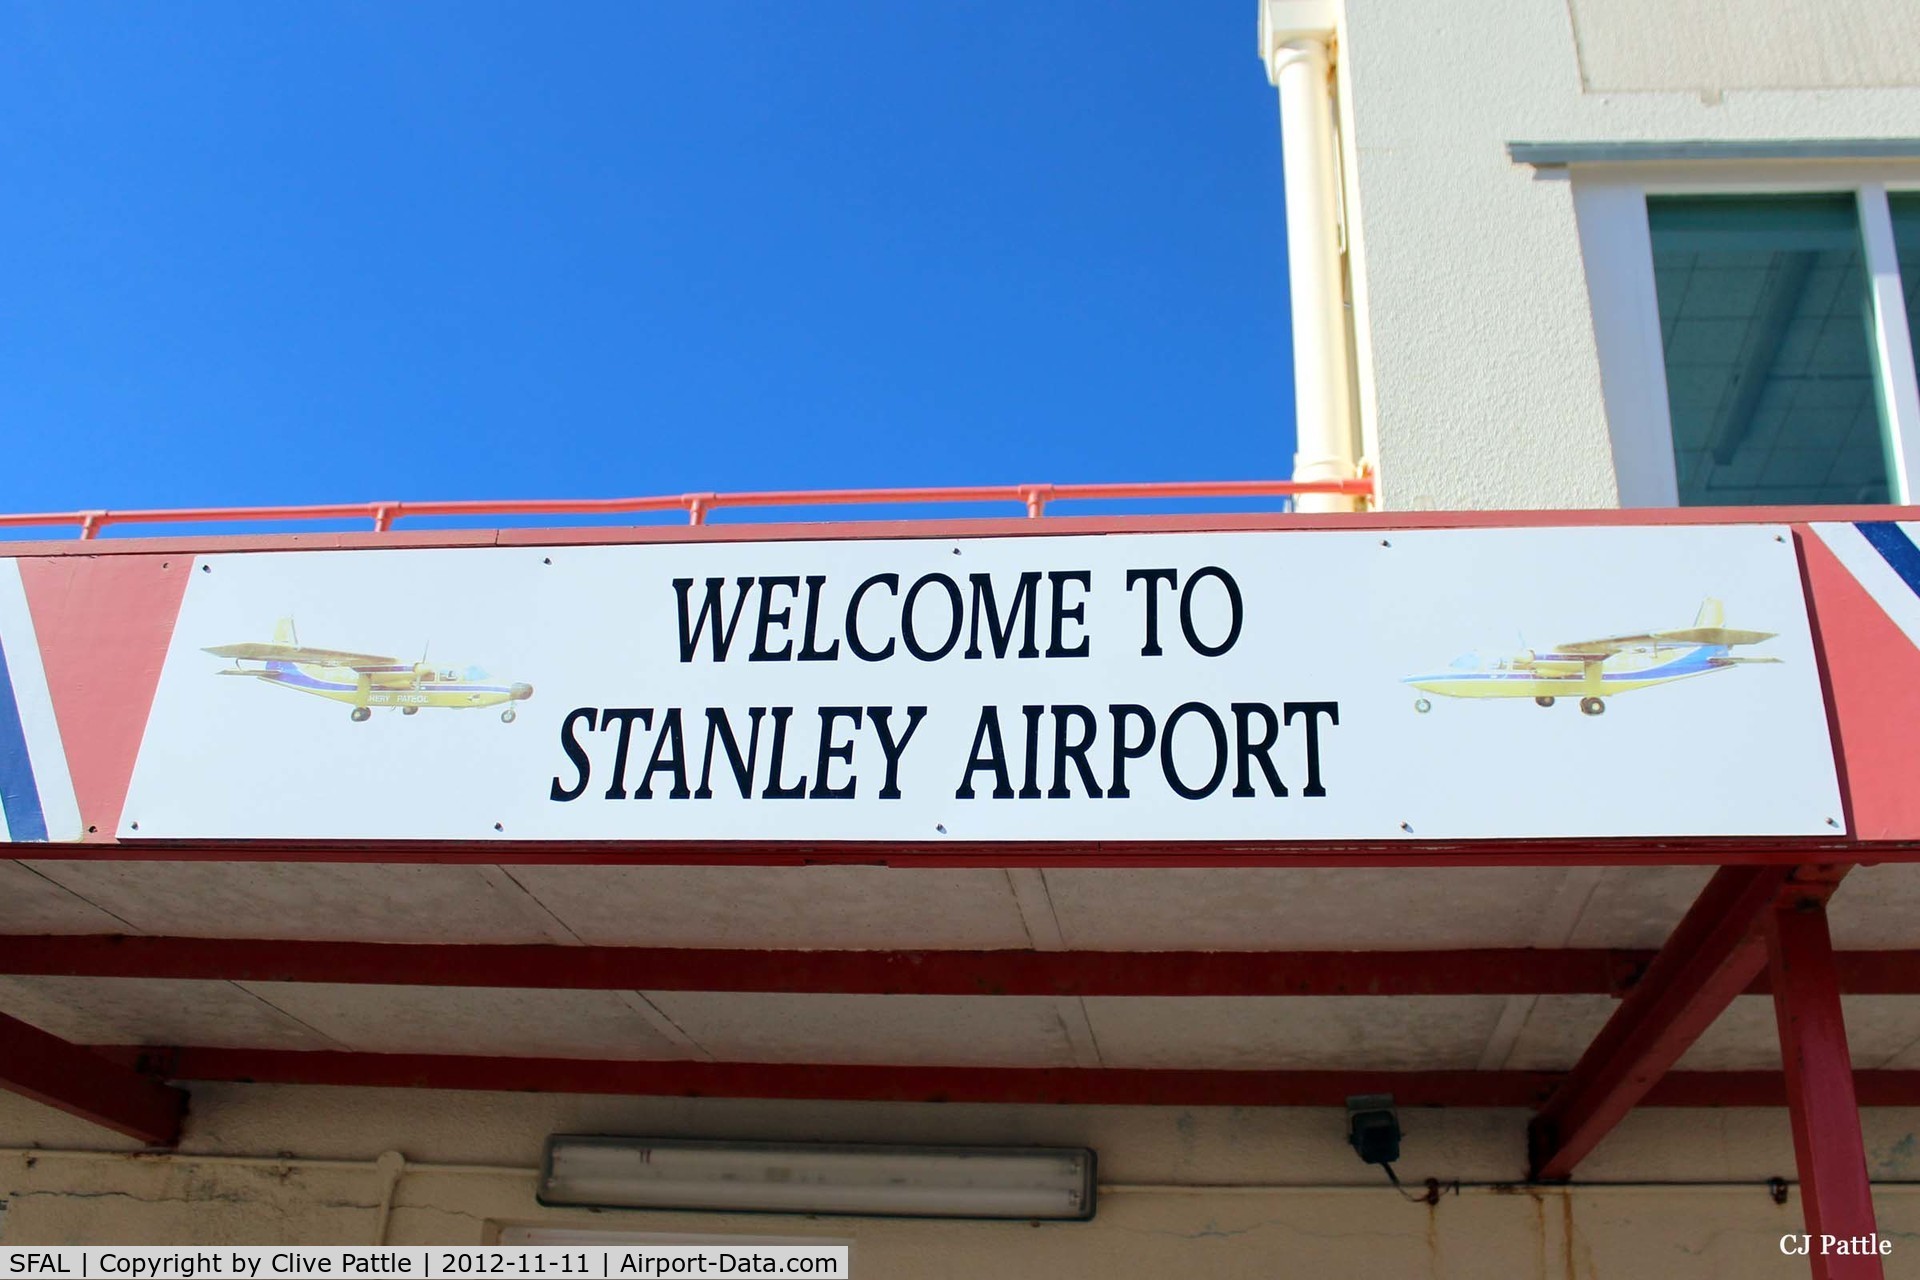 SFAL Airport - Welcome to Stanley Airport sign on the airport terminal building